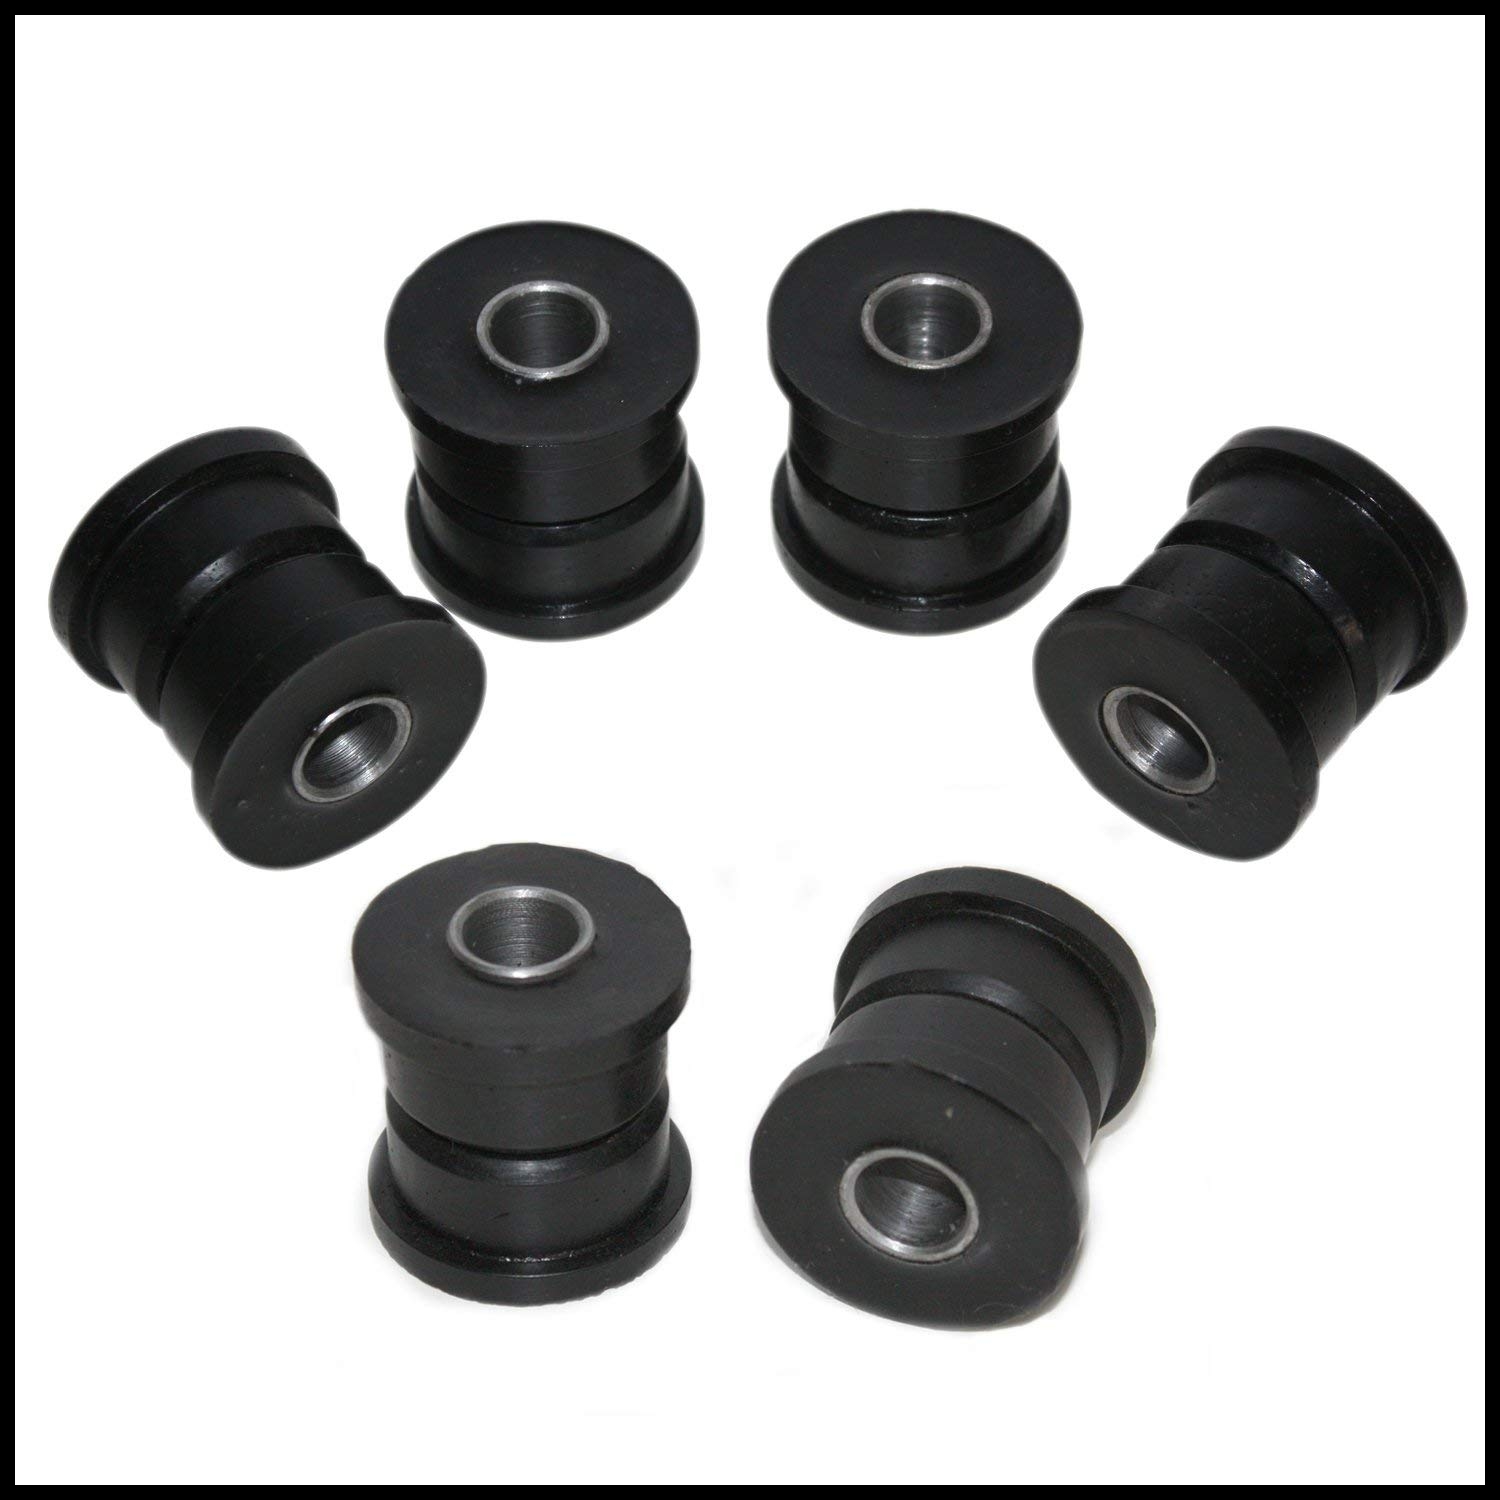 Amazon Toyota Camry Front & Rear Lateral Arm Bushing Kit 92 00 L & R 135F & 135R Automotive